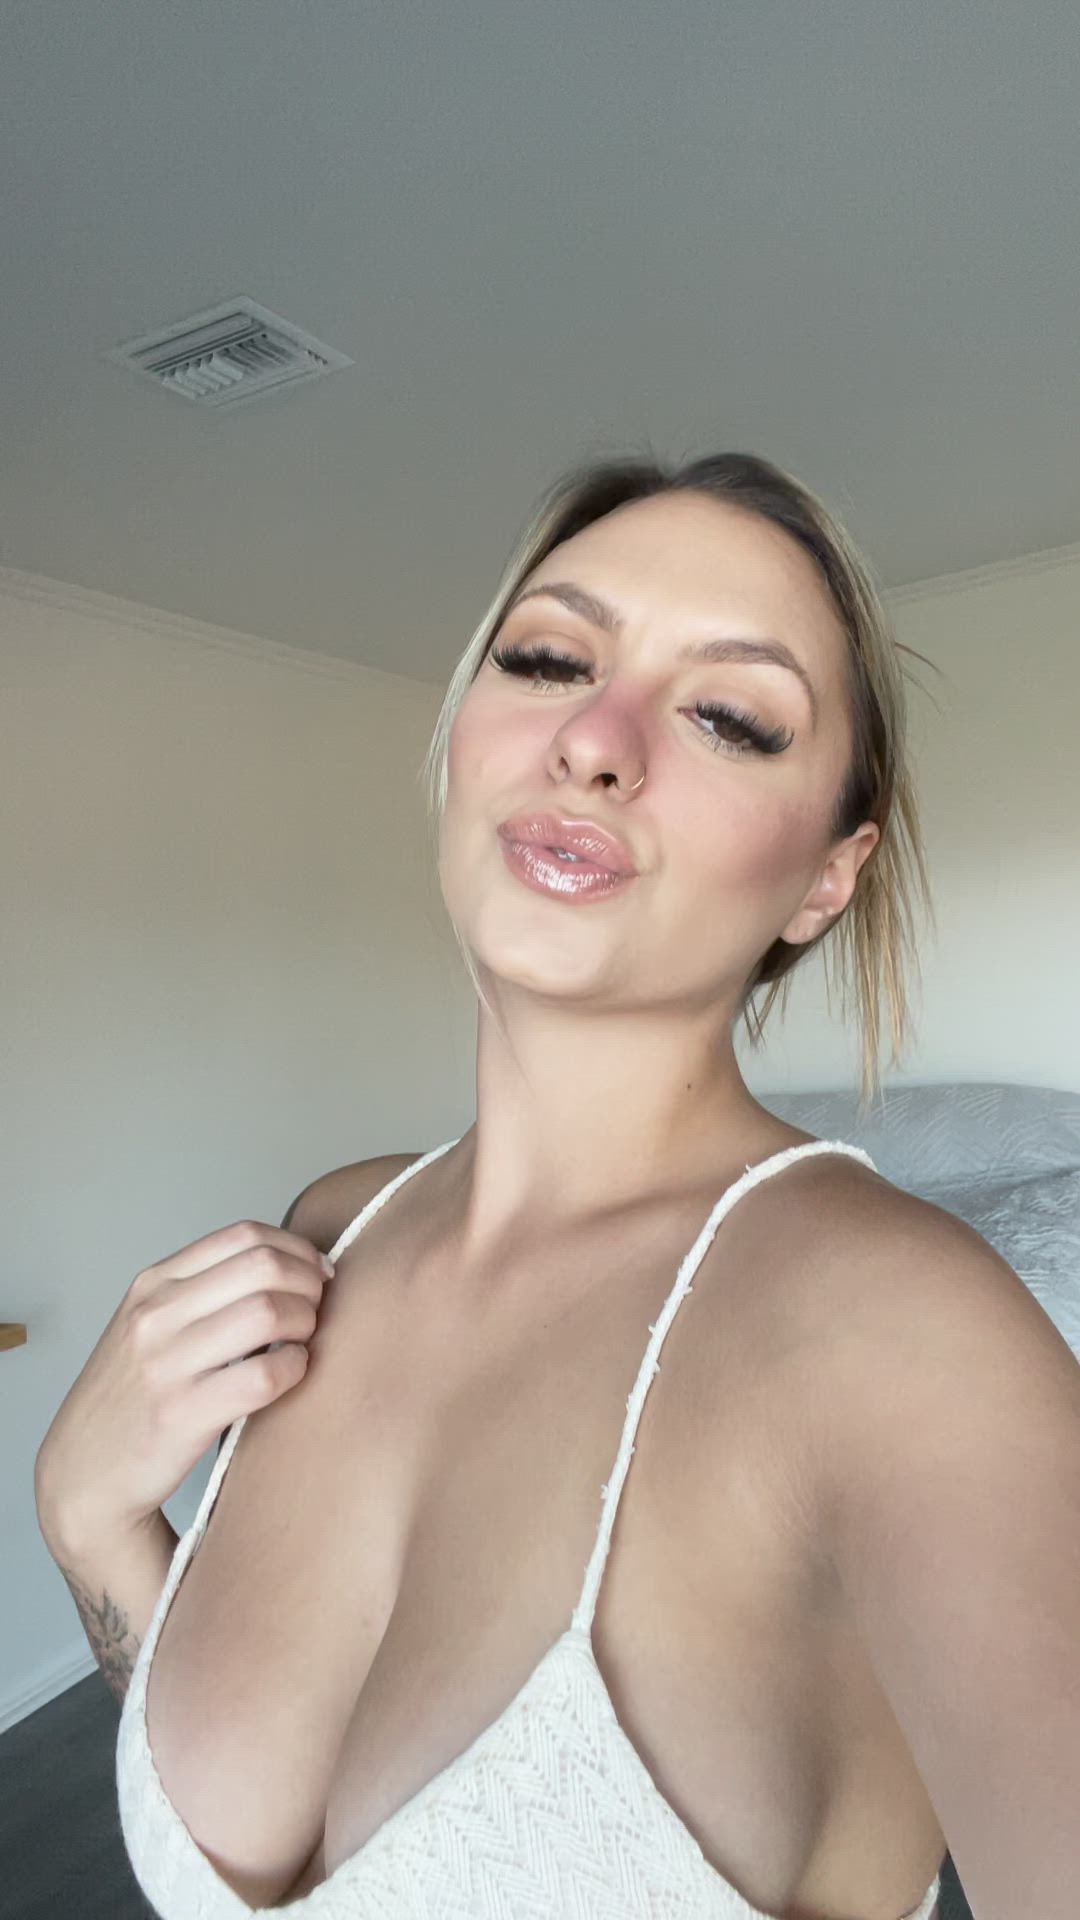 Big Tits porn video with onlyfans model Rose <strong>@gypsyrose137</strong>